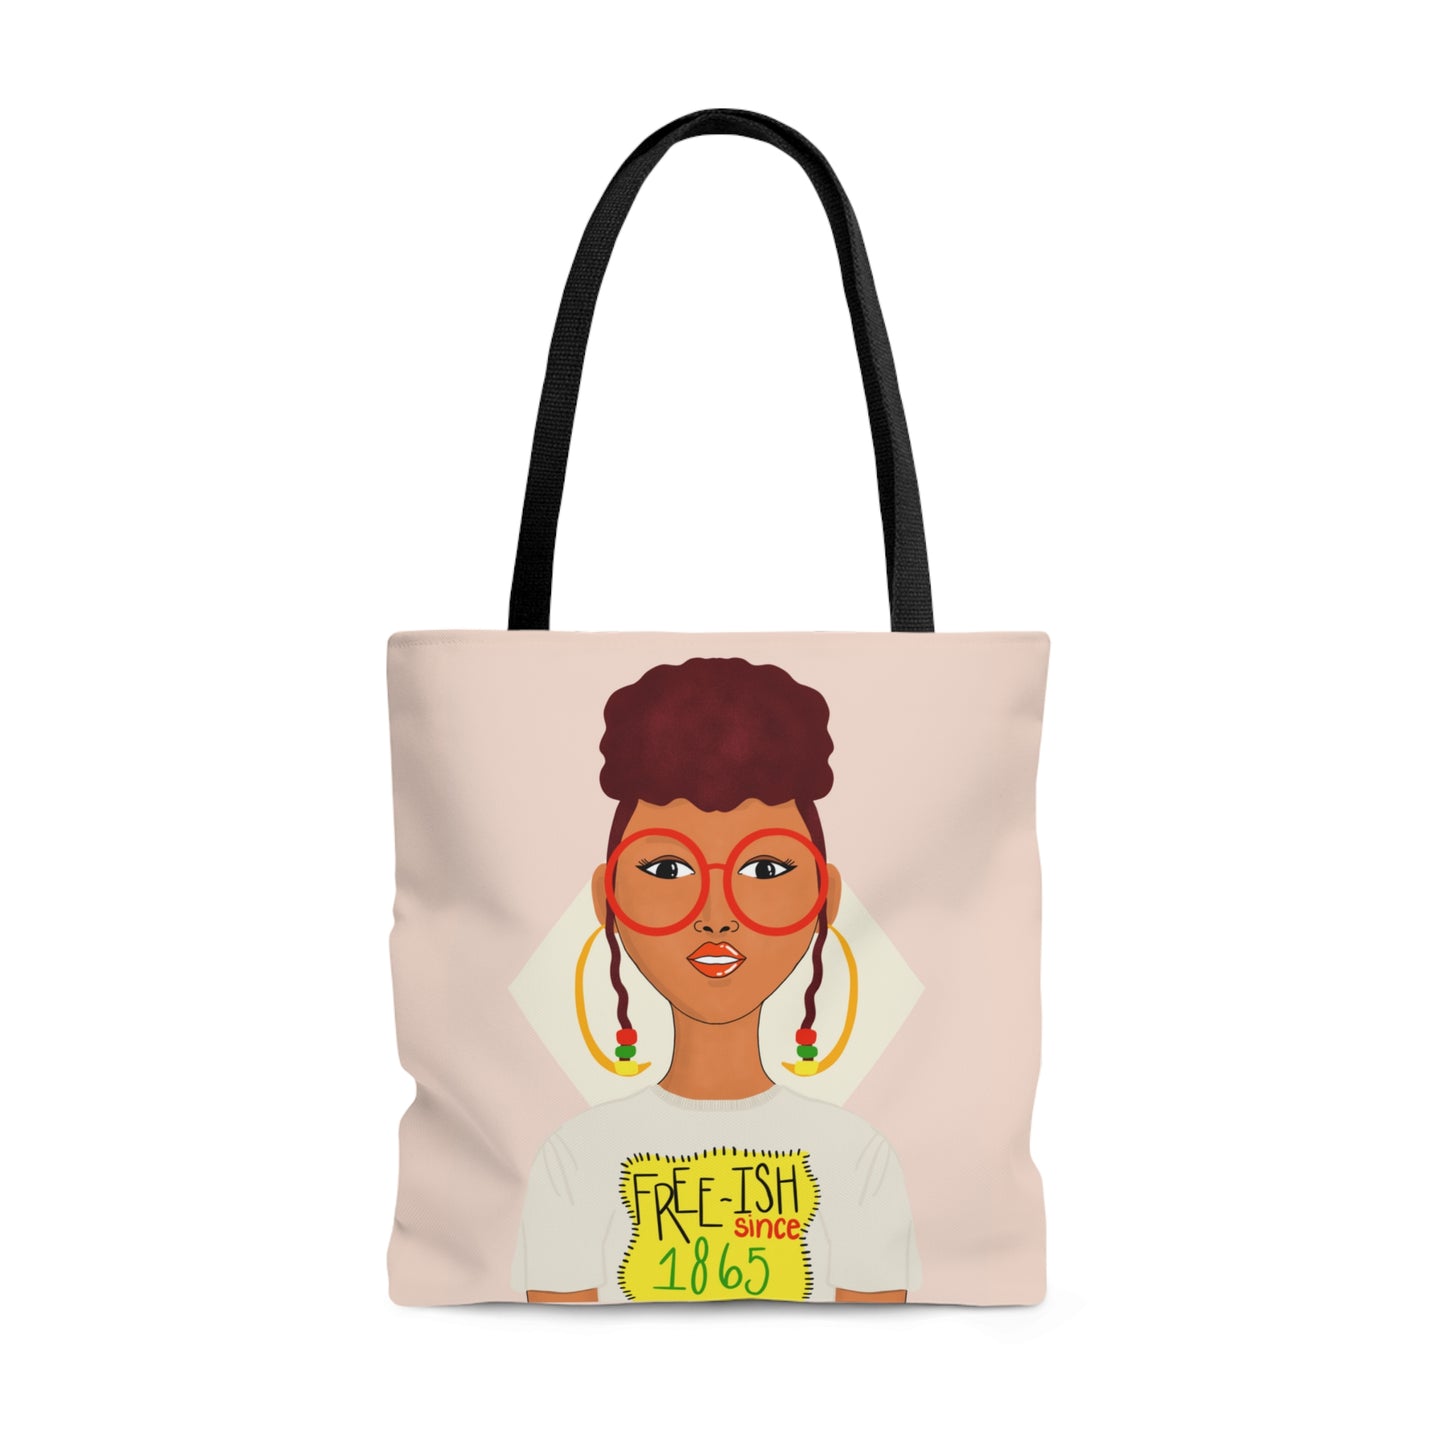 Free-ish 2 sided Juneteenth Tote Bag